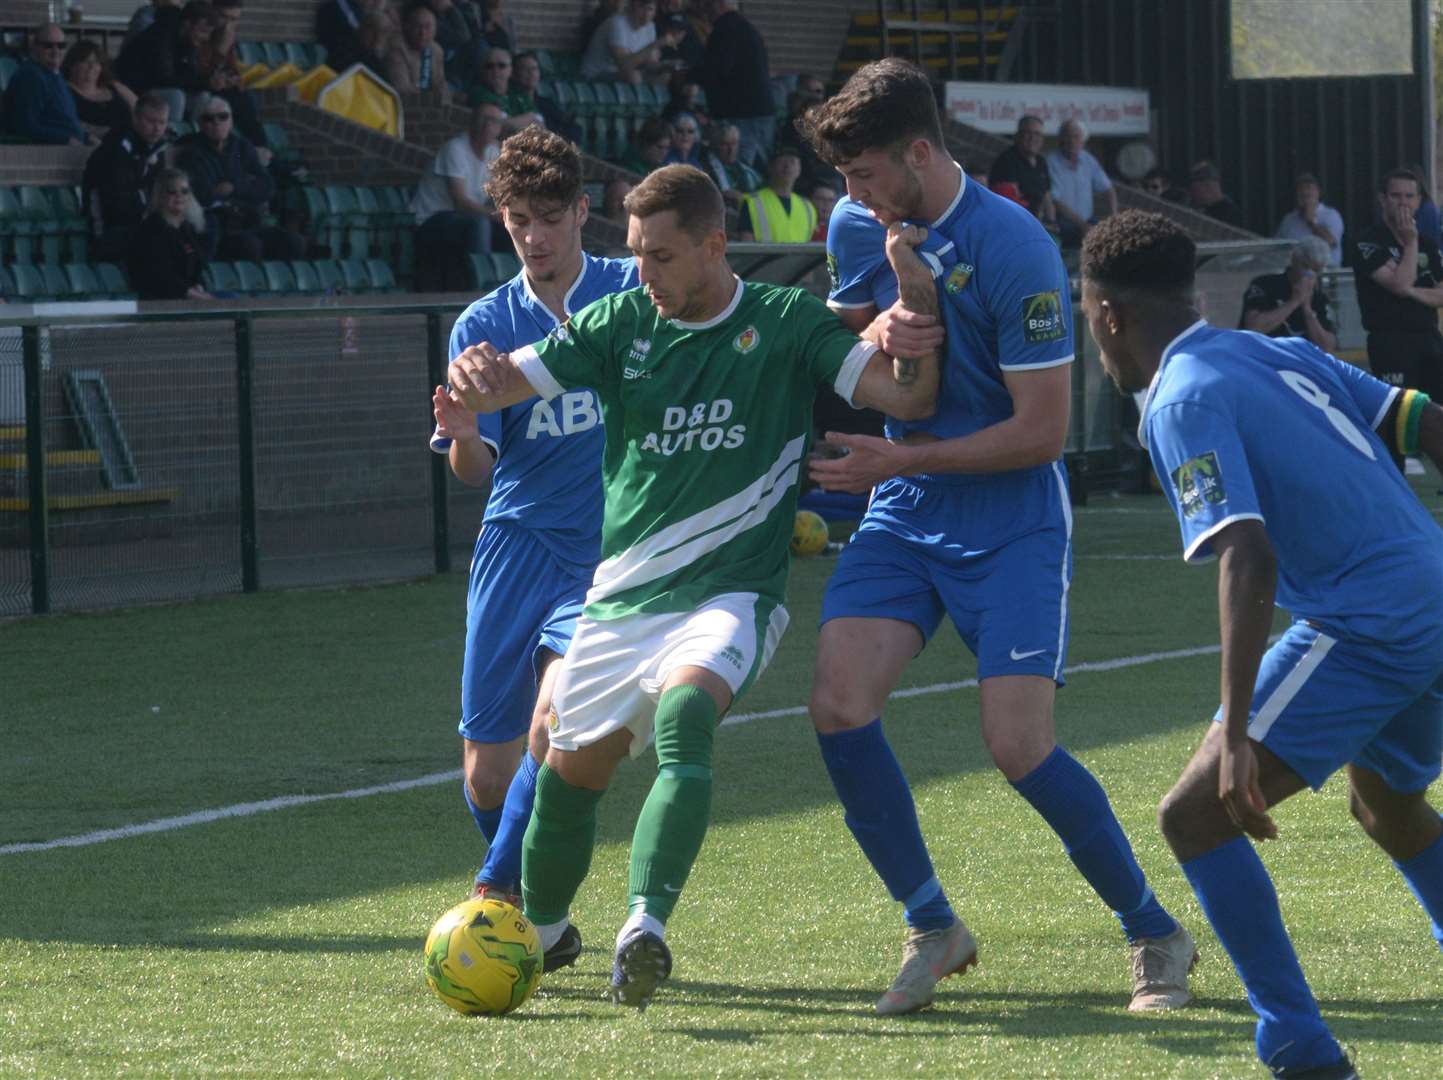 Ashford qualified for the play-offs with a 3-1 win over VCD Picture: Chris Davey